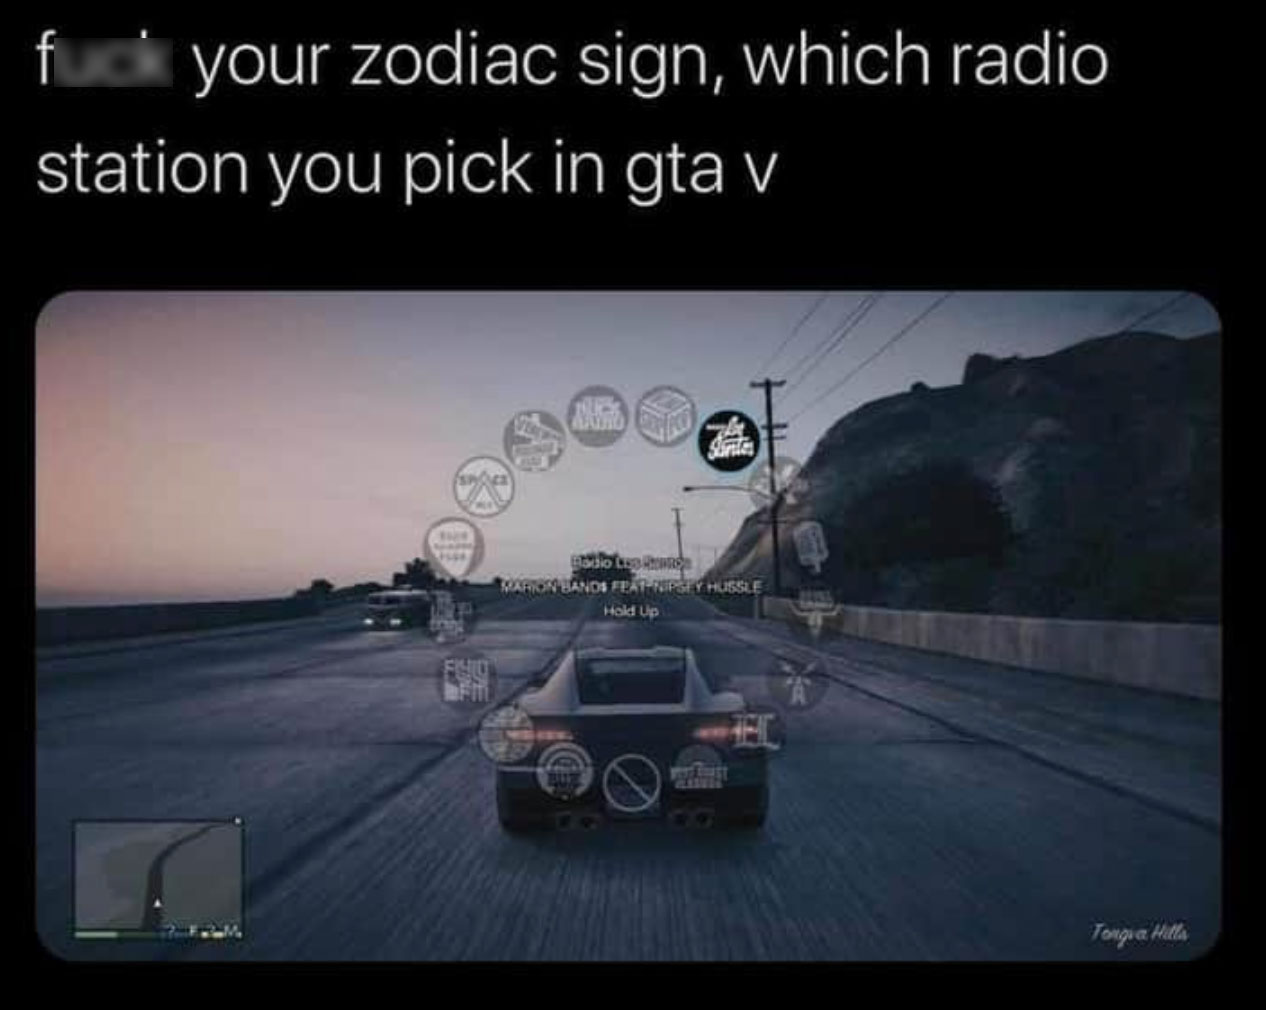 gta v west coast classics - f your zodiac sign, which radio station you pick in gta v Sur Solis Warion Banos Featupsey Hussee Hold up Tongia Hatta